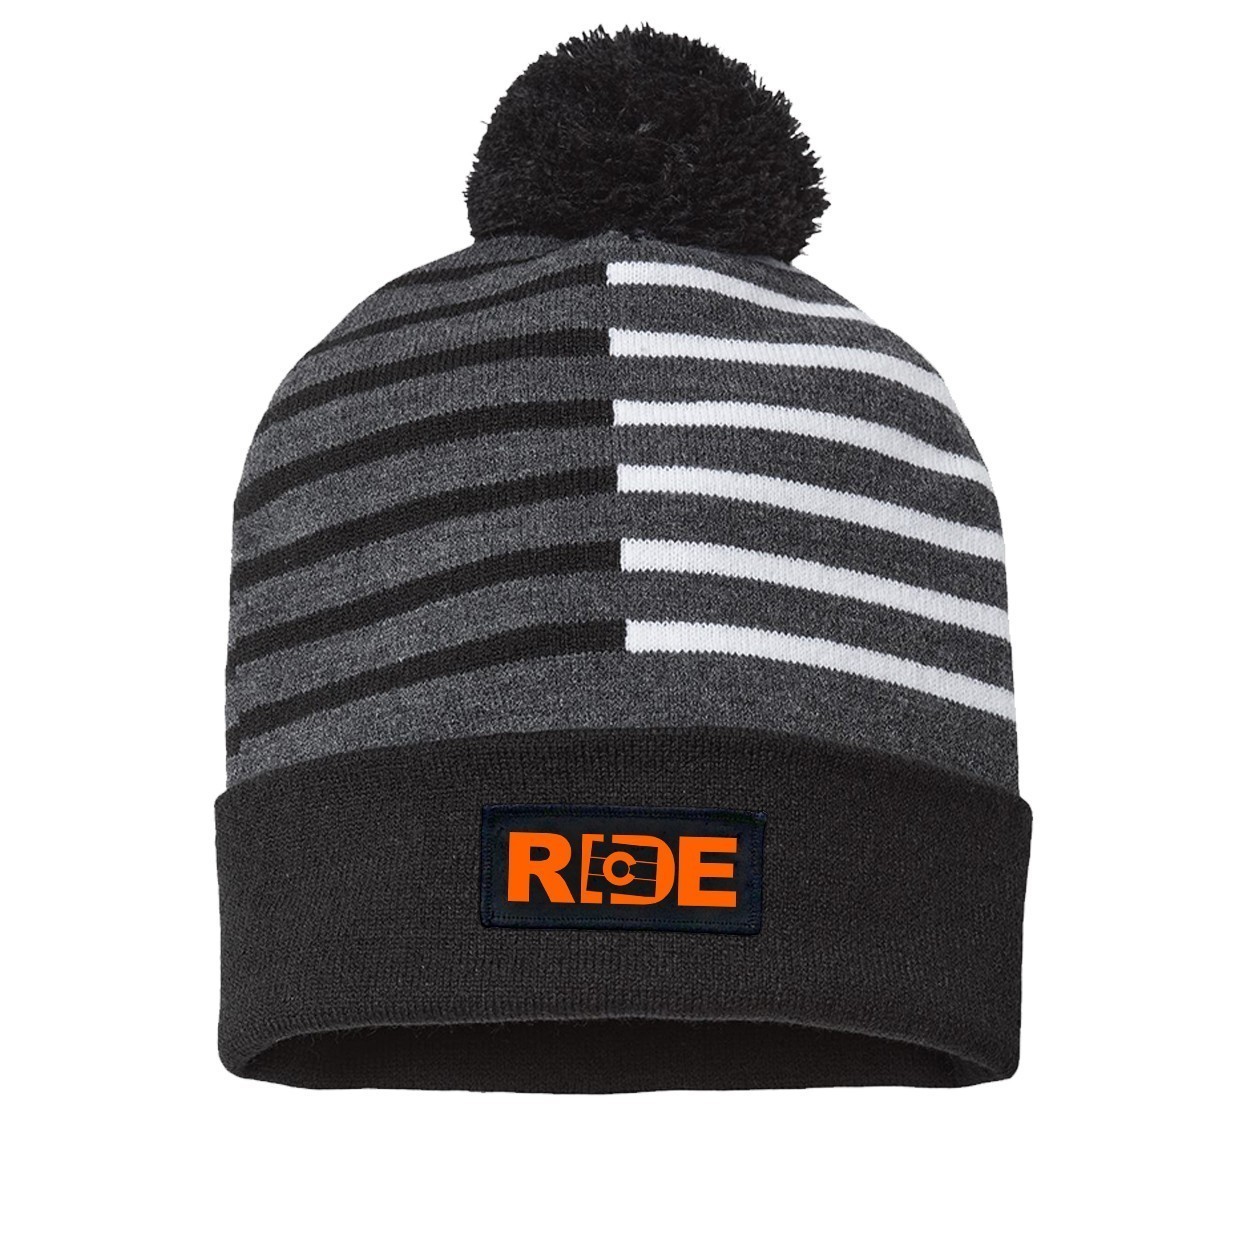 Ride Colorado Night Out Woven Patch Roll Up Pom Knit Beanie Half Color Black/White (Orange Logo)